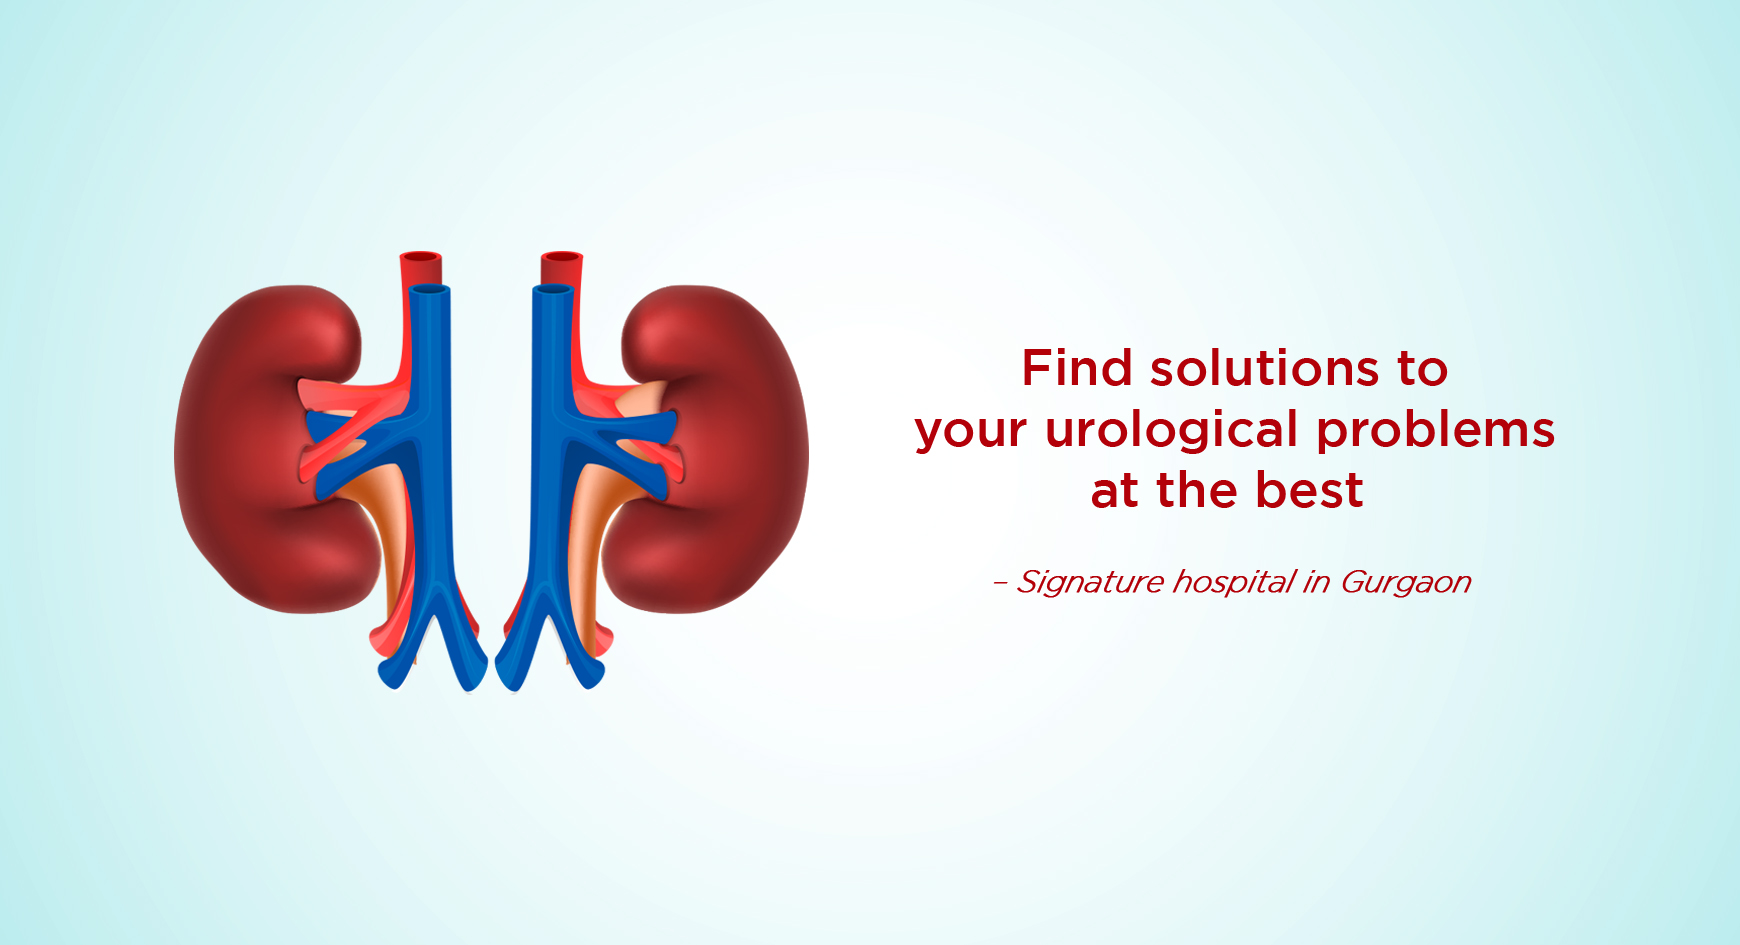 Find solutions to your urological problems at the best – Signature hospital in Gurgaon